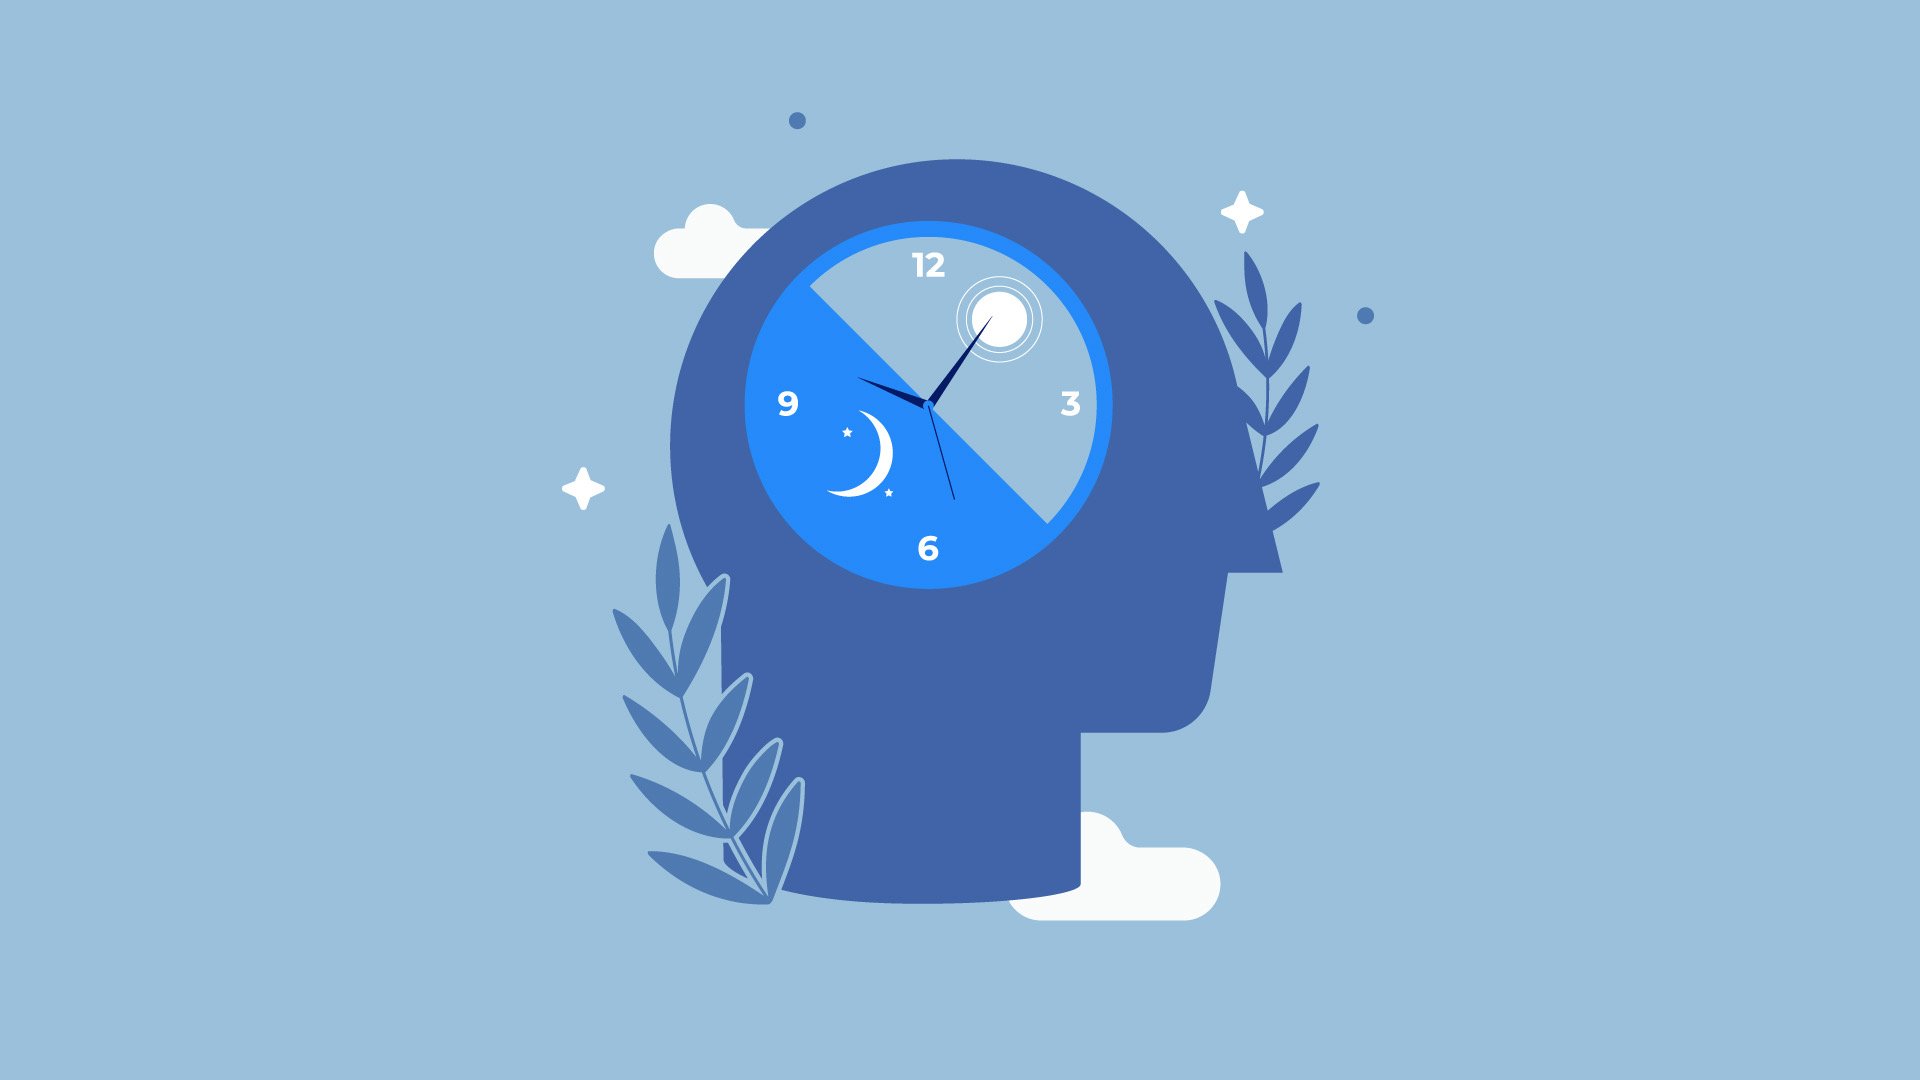 Sleep Deprivation And Reaction Time: Are They Correlated?